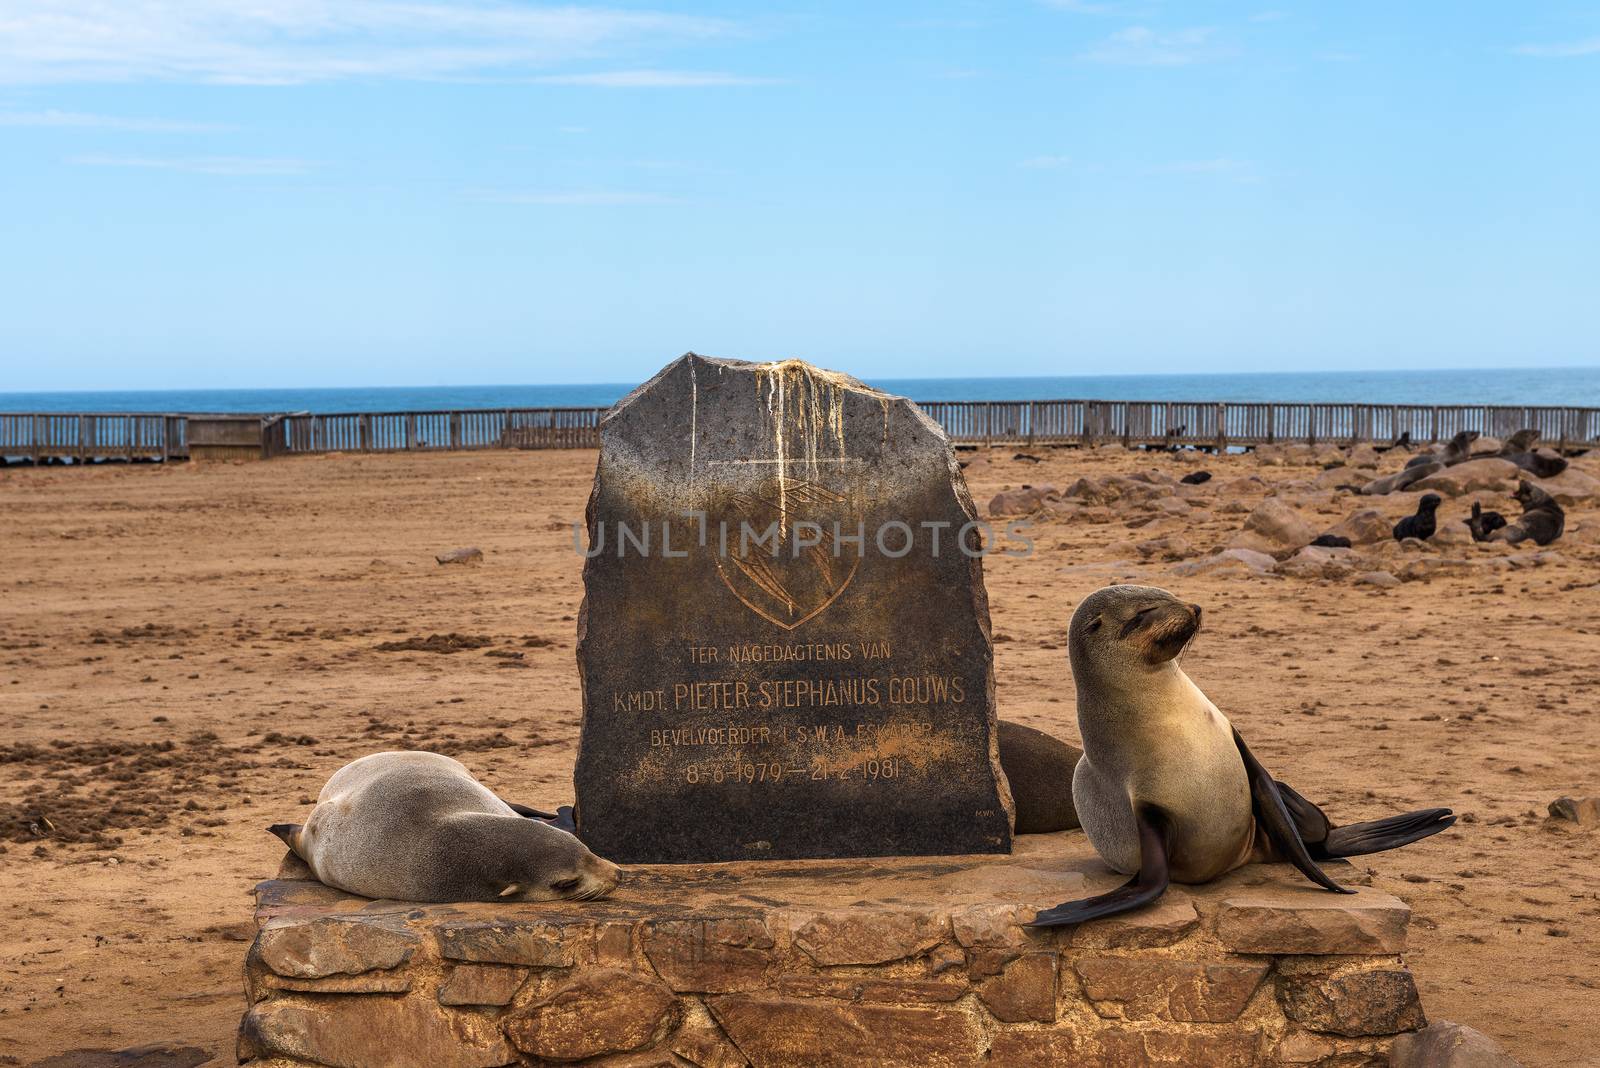 Seals at the Cape Cross Seal Reserve in Namibia and its entry sign with text In memory of kmdt. Pieter Stephanus Gouws. It is the home of one of the largest colonies of Cape fur seals in the world.